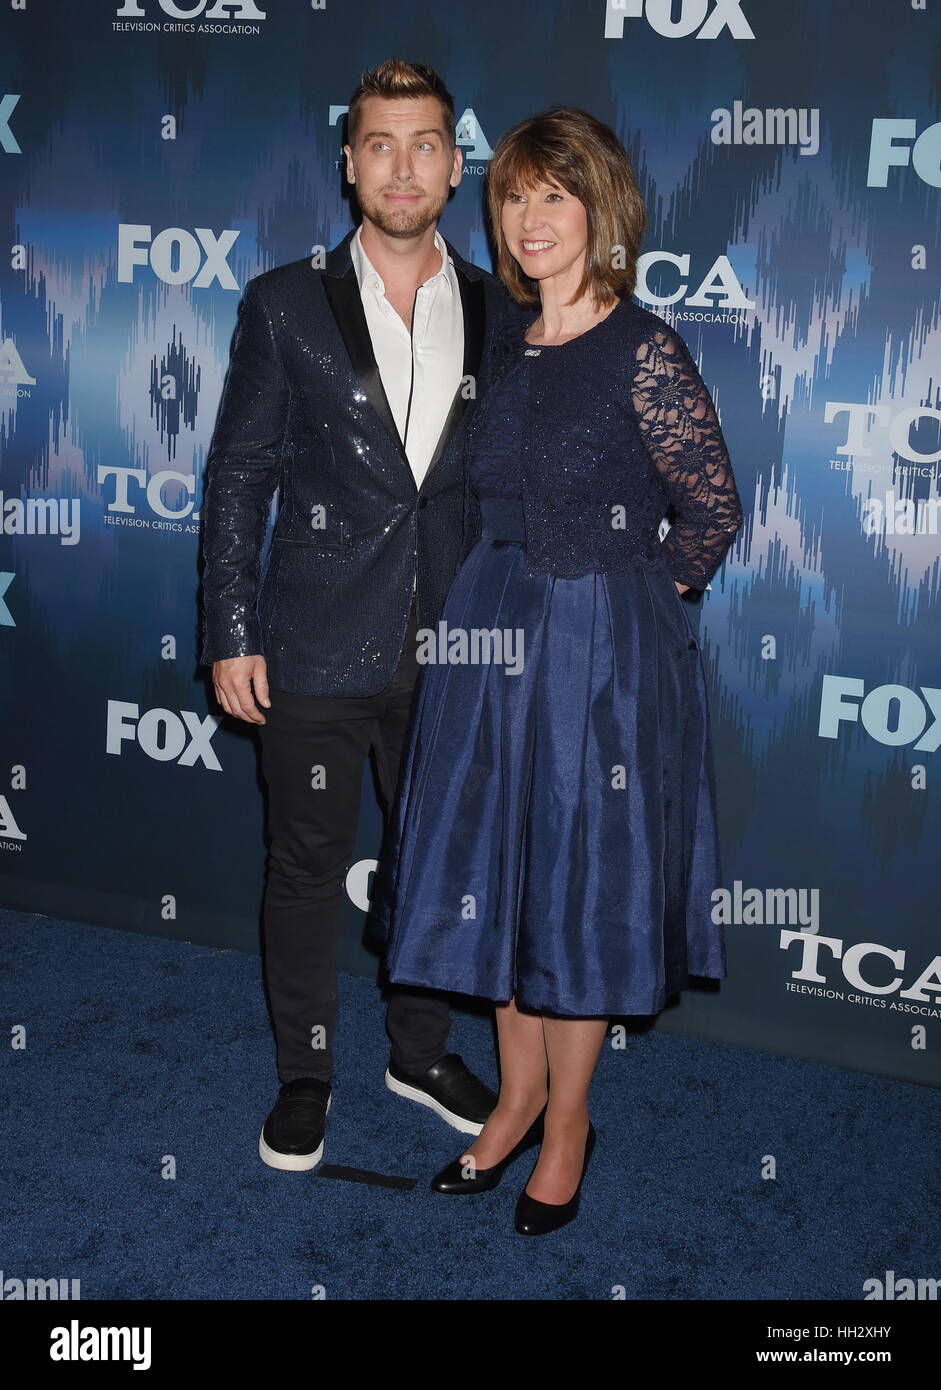 Pasadena, California. 11th Jan, 2017. PASADENA, CA - JANUARY 11: TV personality/singer Lance Bass (L) and mother Diane Bass attend the 2017 Winter TCA Tour - FOX All-Star Party at the Langham Huntington Hotel on January 11, 2017 in Pasadena, California. | usage worldwide Credit: dpa/Alamy Live News Stock Photo